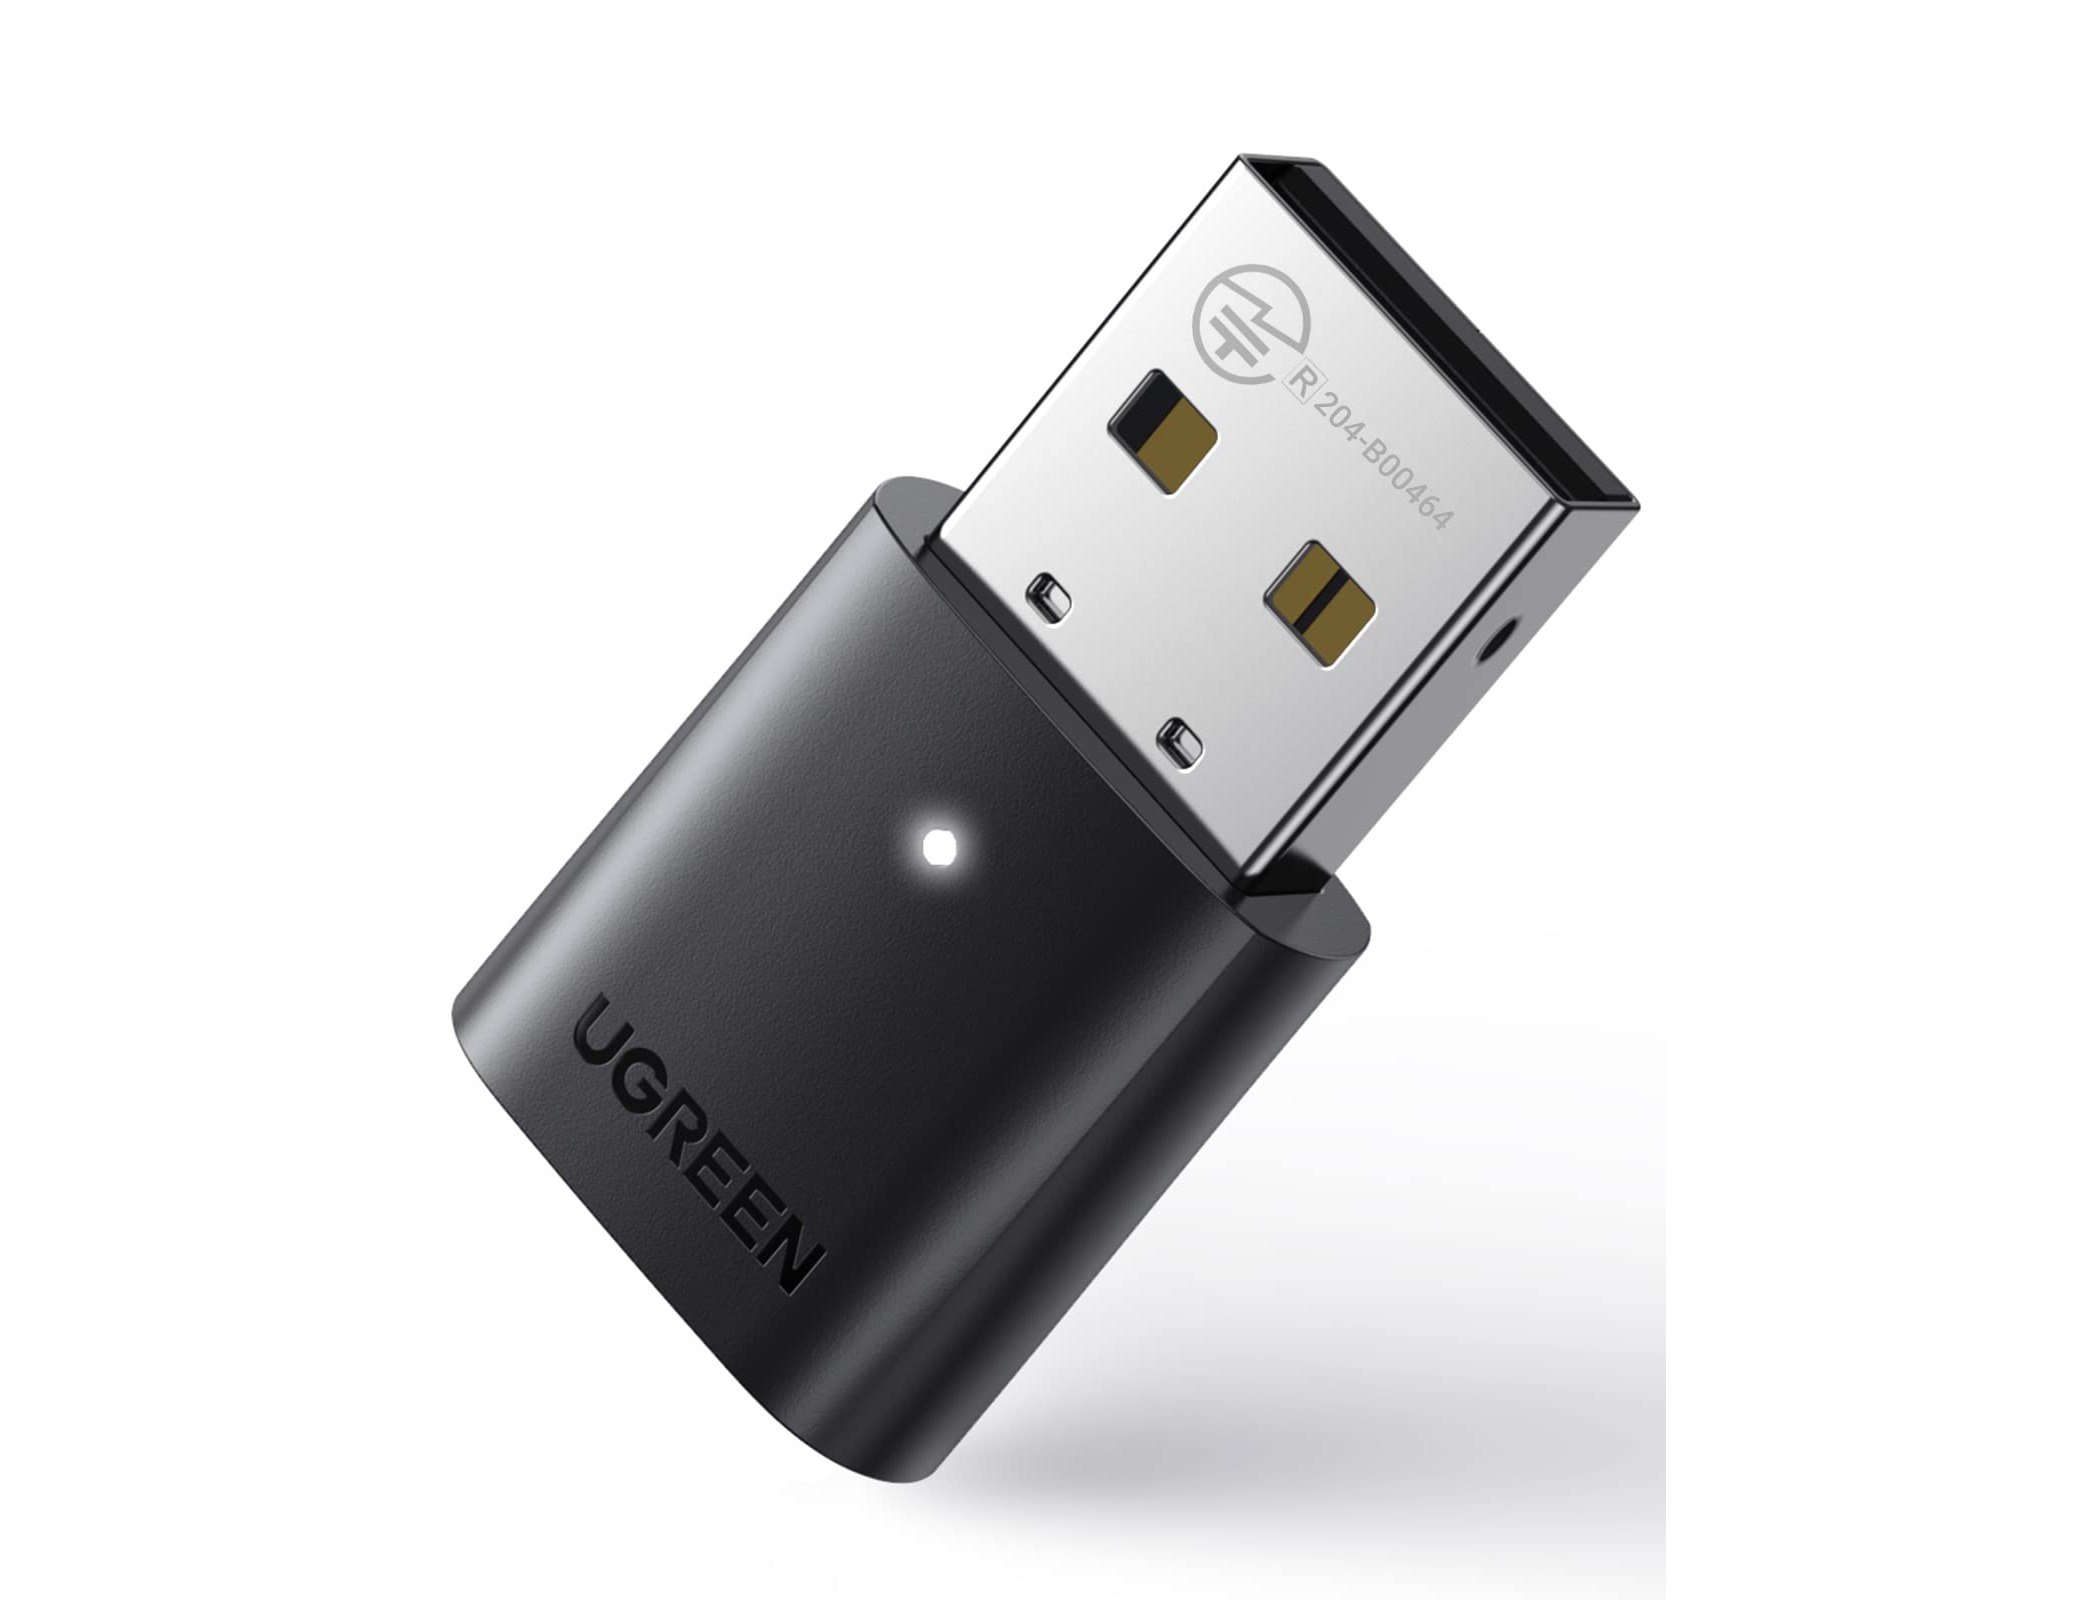 phone-as-a-dongle-using-your-phone-as-a-bluetooth-dongle